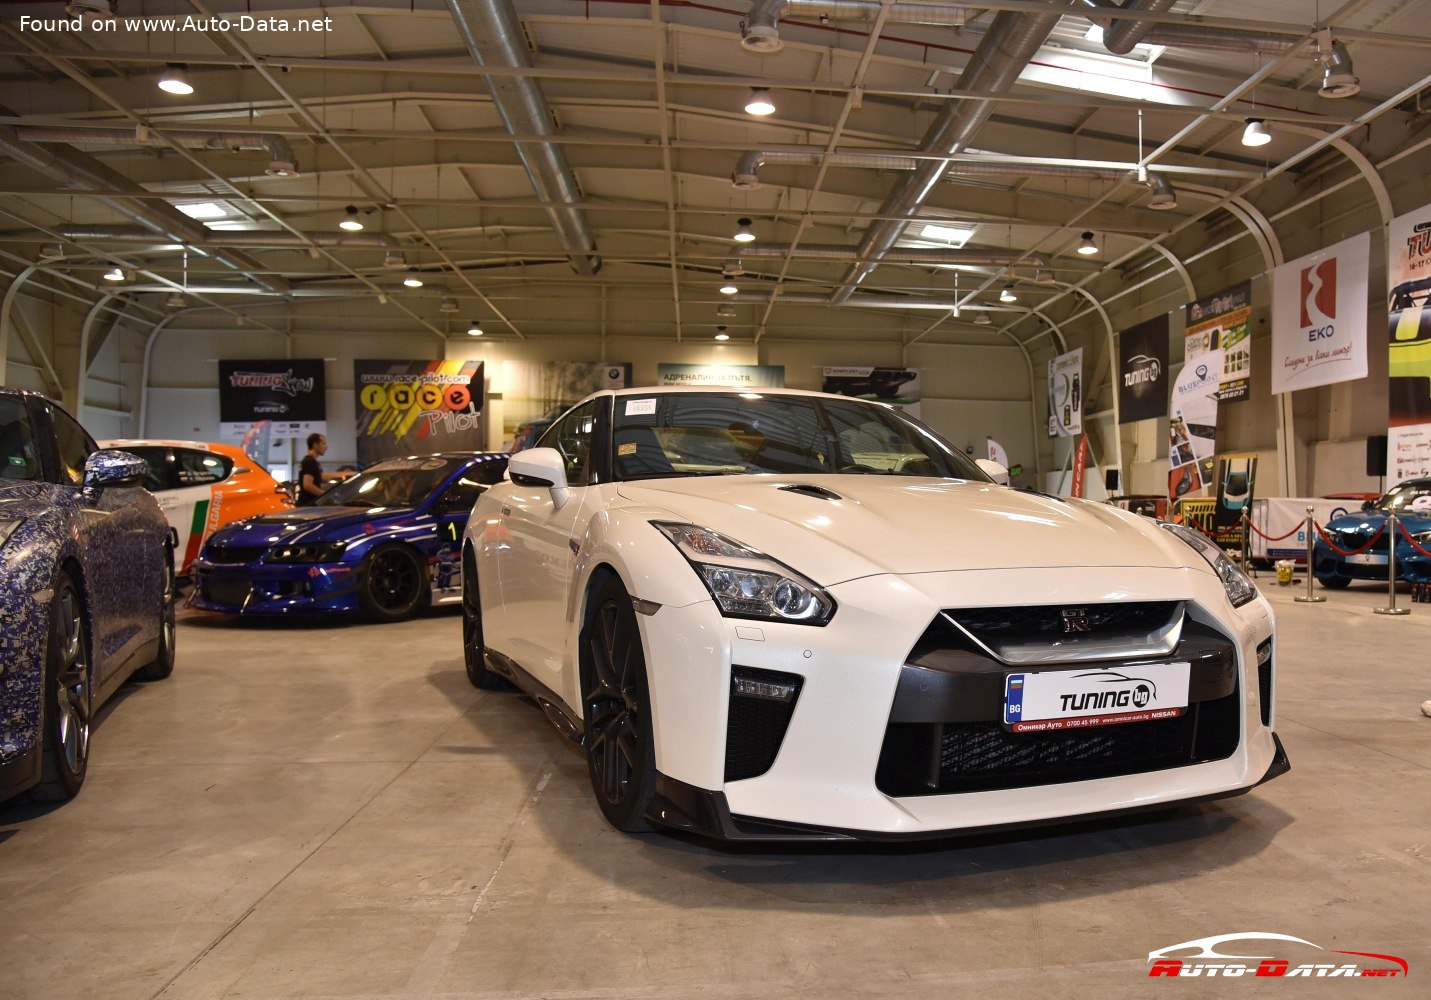 16 Nissan Gt R R35 3 8 V6 570 Hp 4wd Automatic Technical Specs Data Fuel Consumption Dimensions